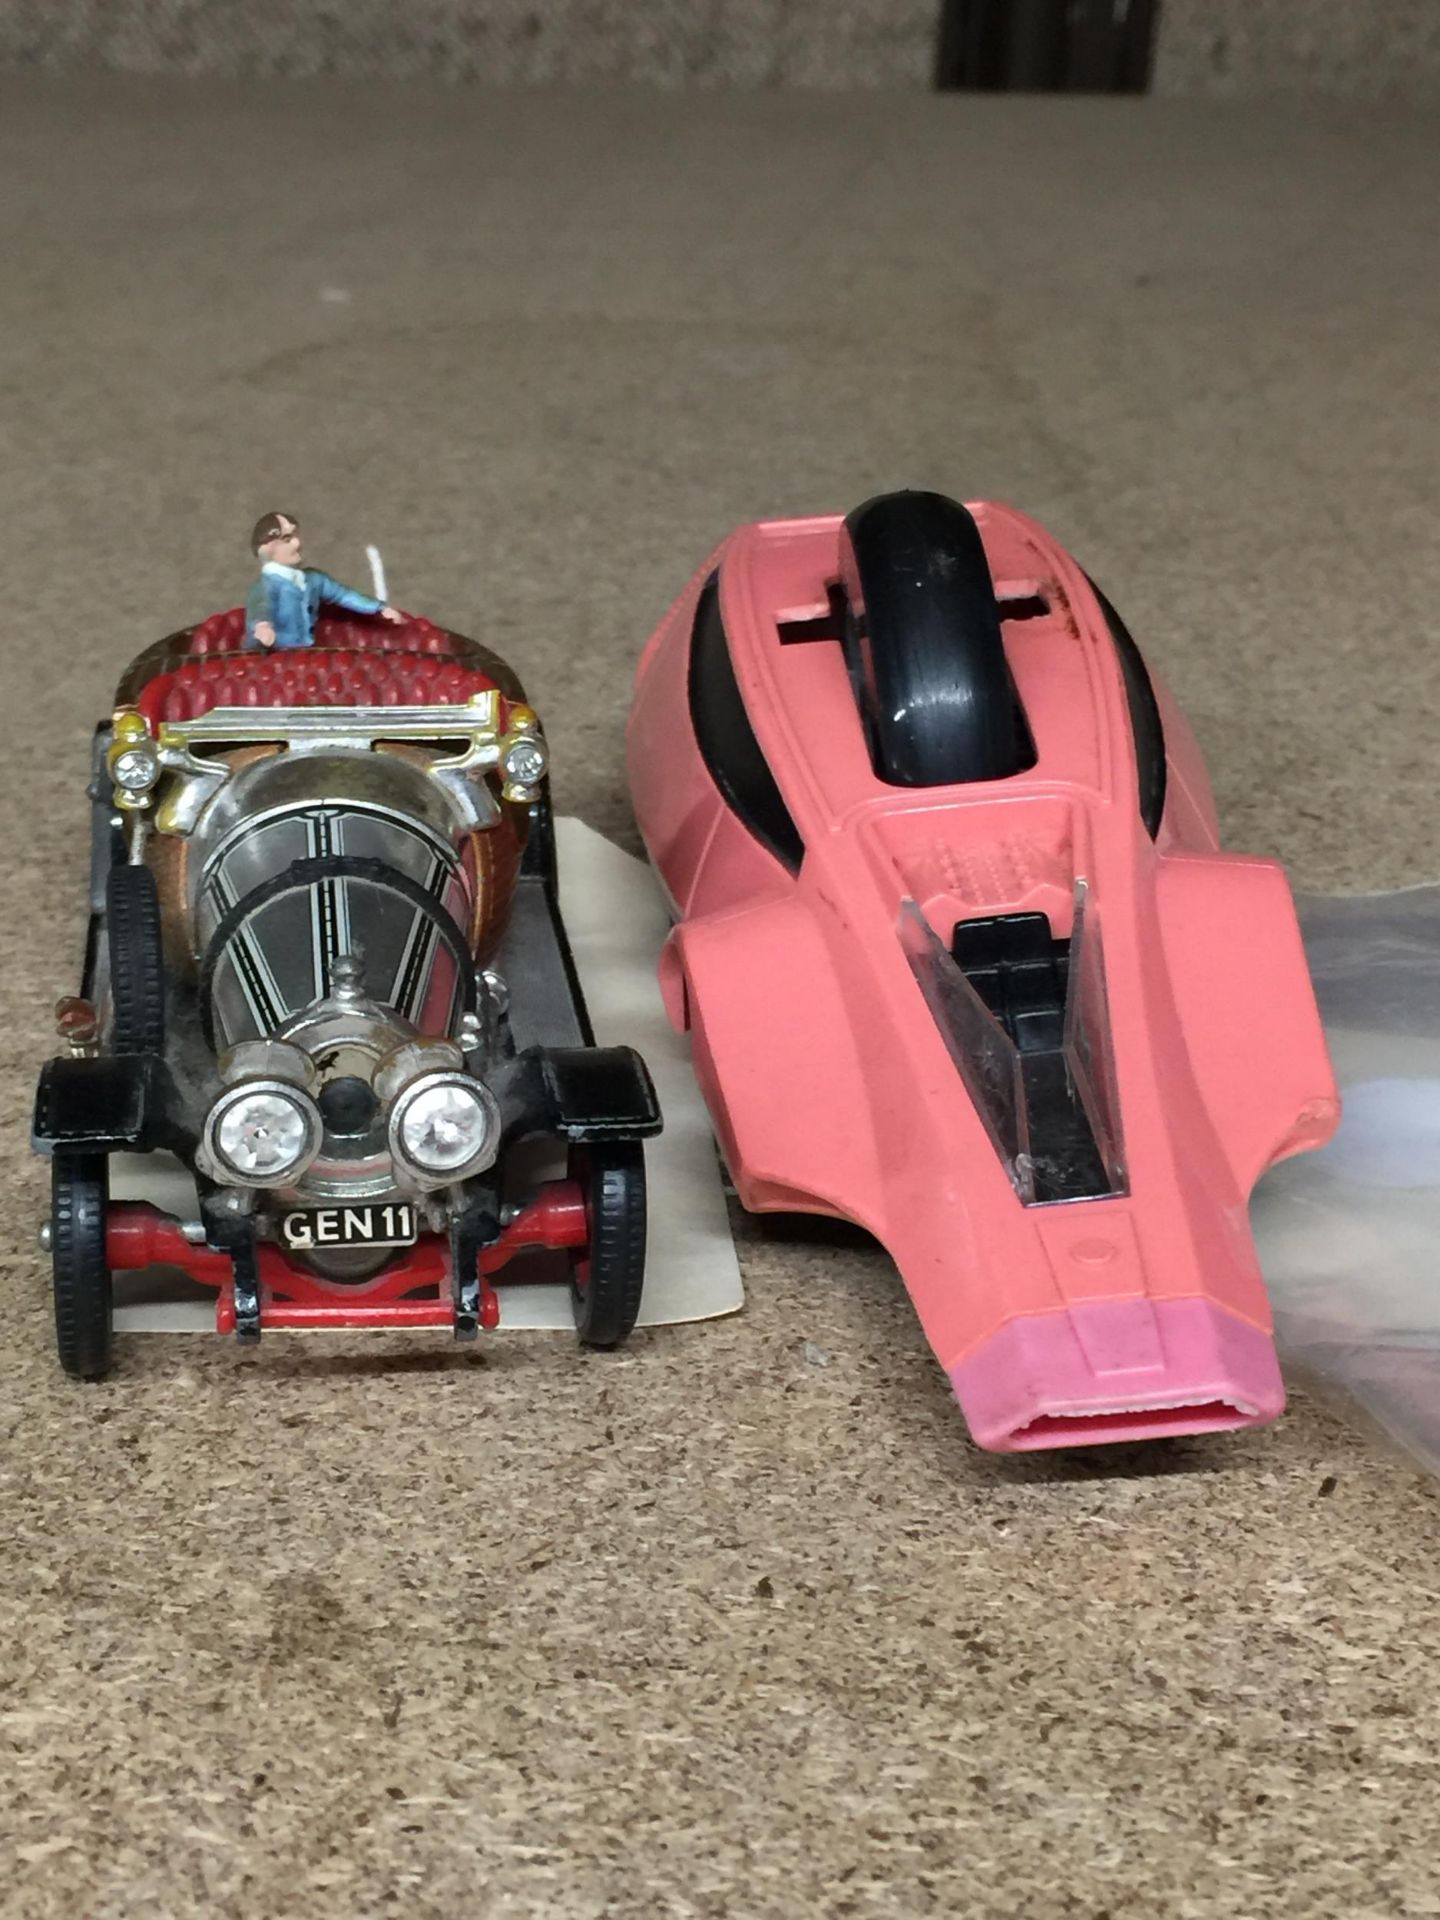 A CORGI CHITTY CHITTY BANG BANG CAR WITH A FIGURE PLUS A DINKY PINK PANTHER CAR WITH A PINK